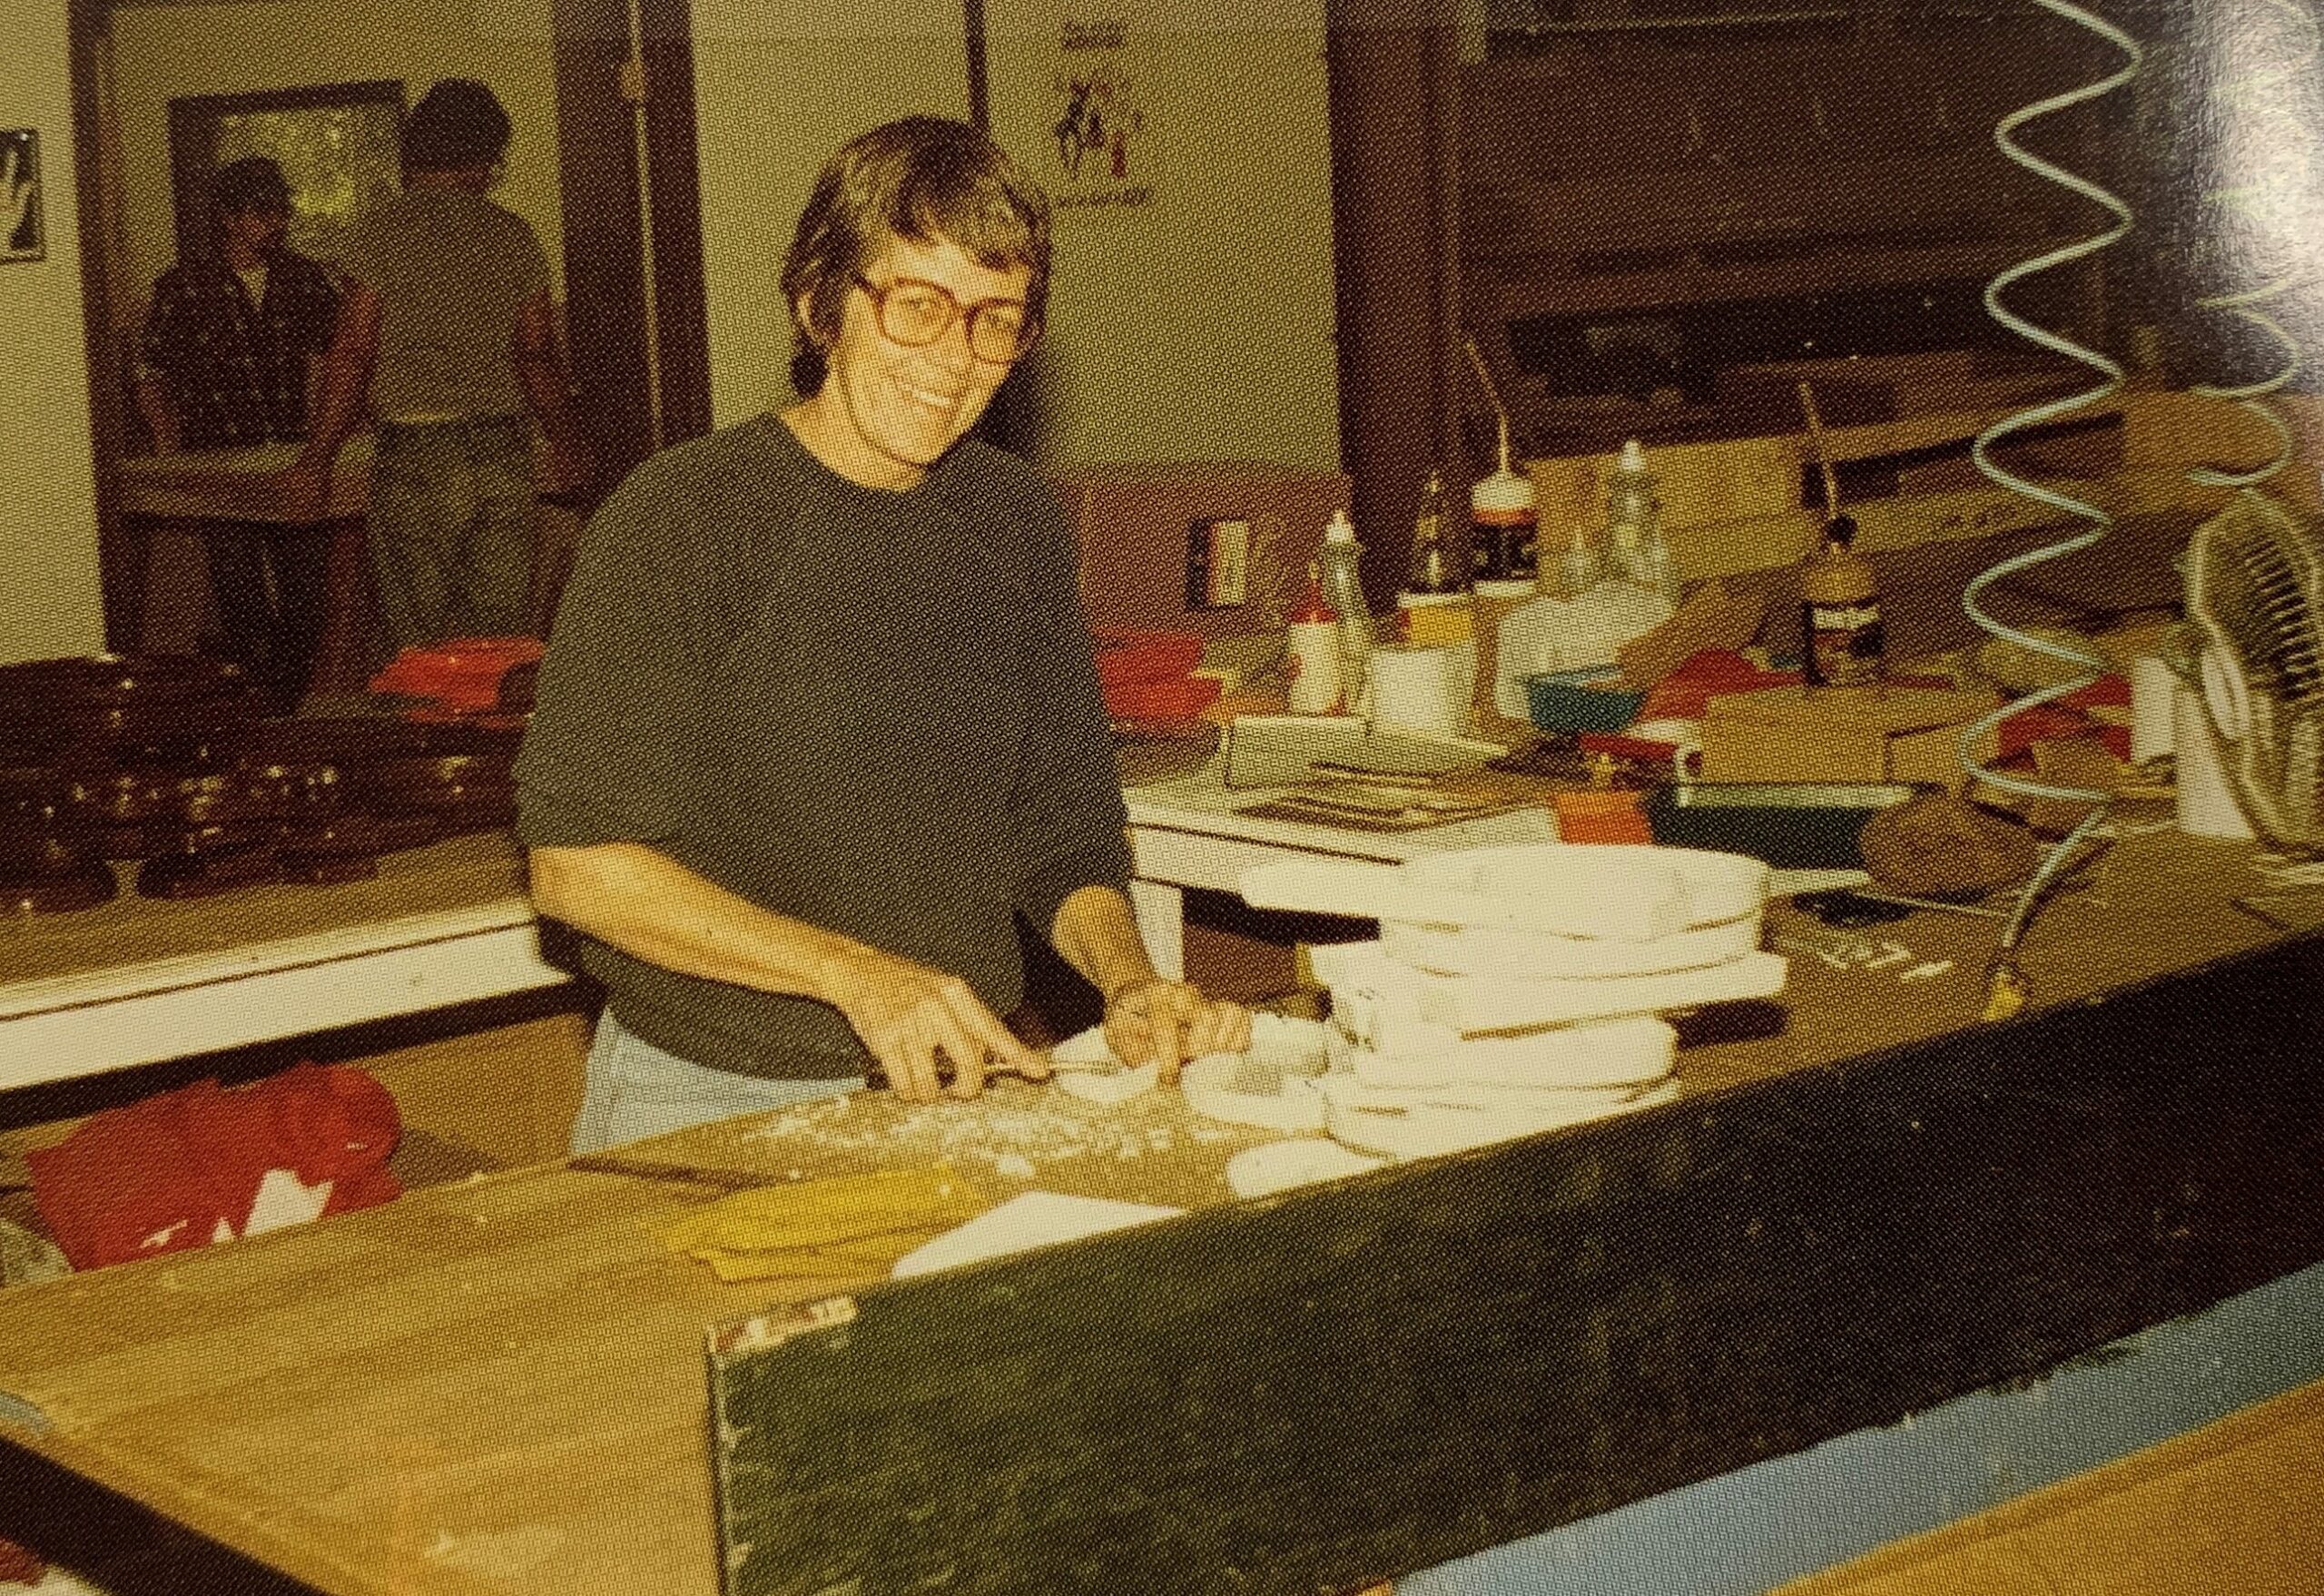 Worker smiling over letter work table